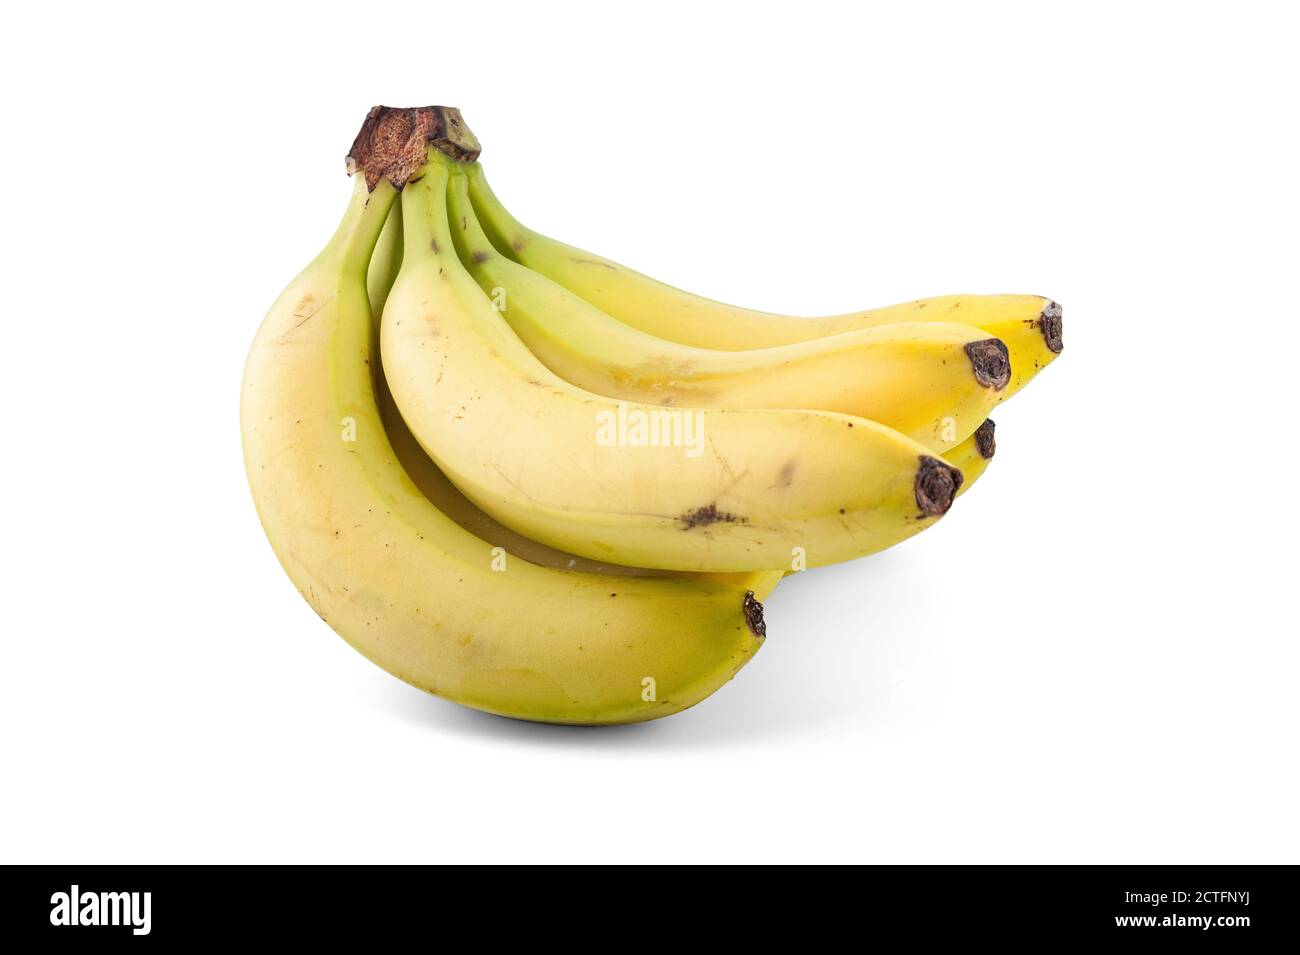 A bunch of Cavendish bananas isolated on white background. Stock Photo